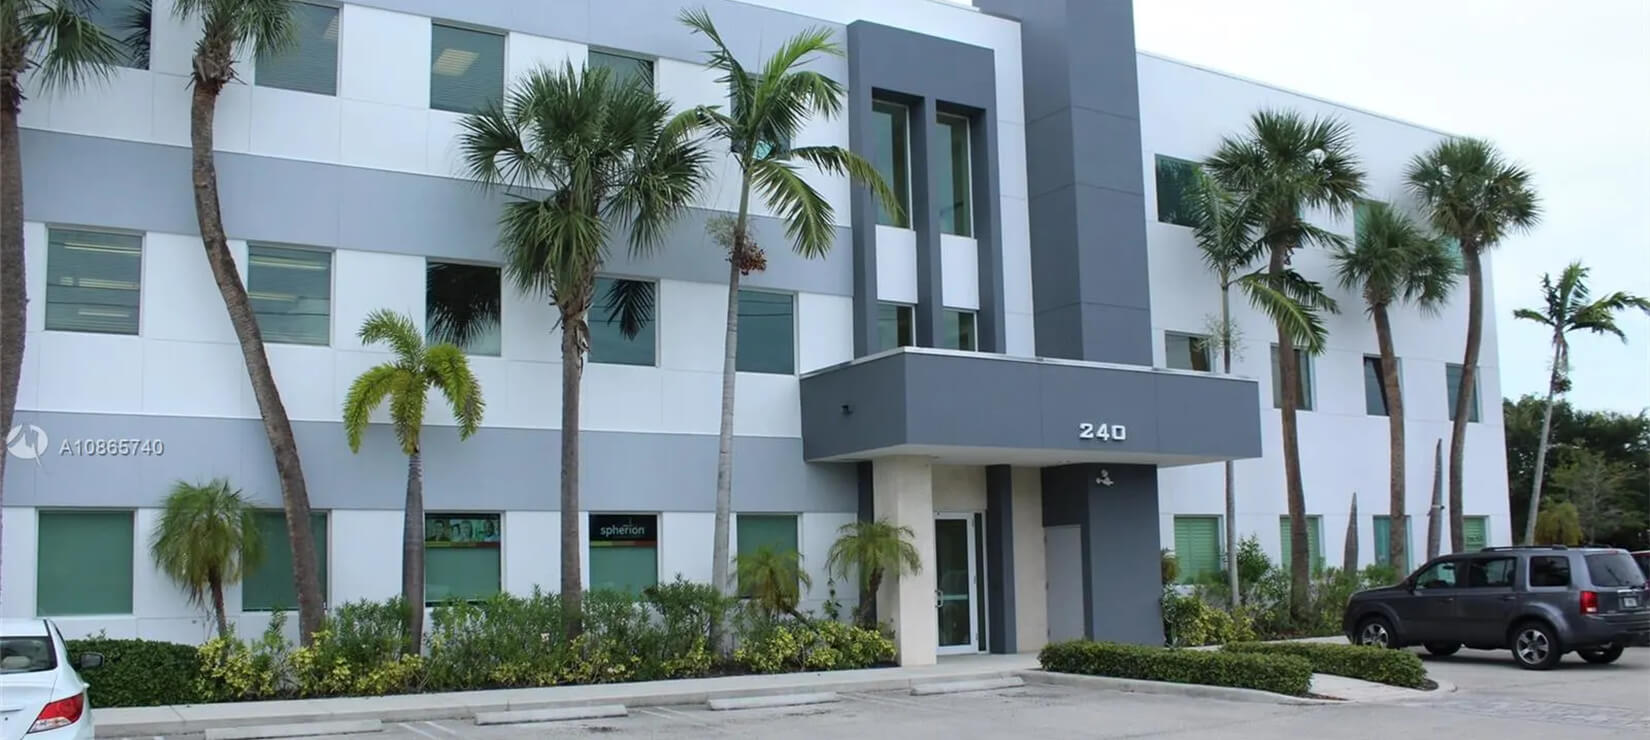 Residential and Commercial Lending Centers opens at 240 NW Peacock Boulevard